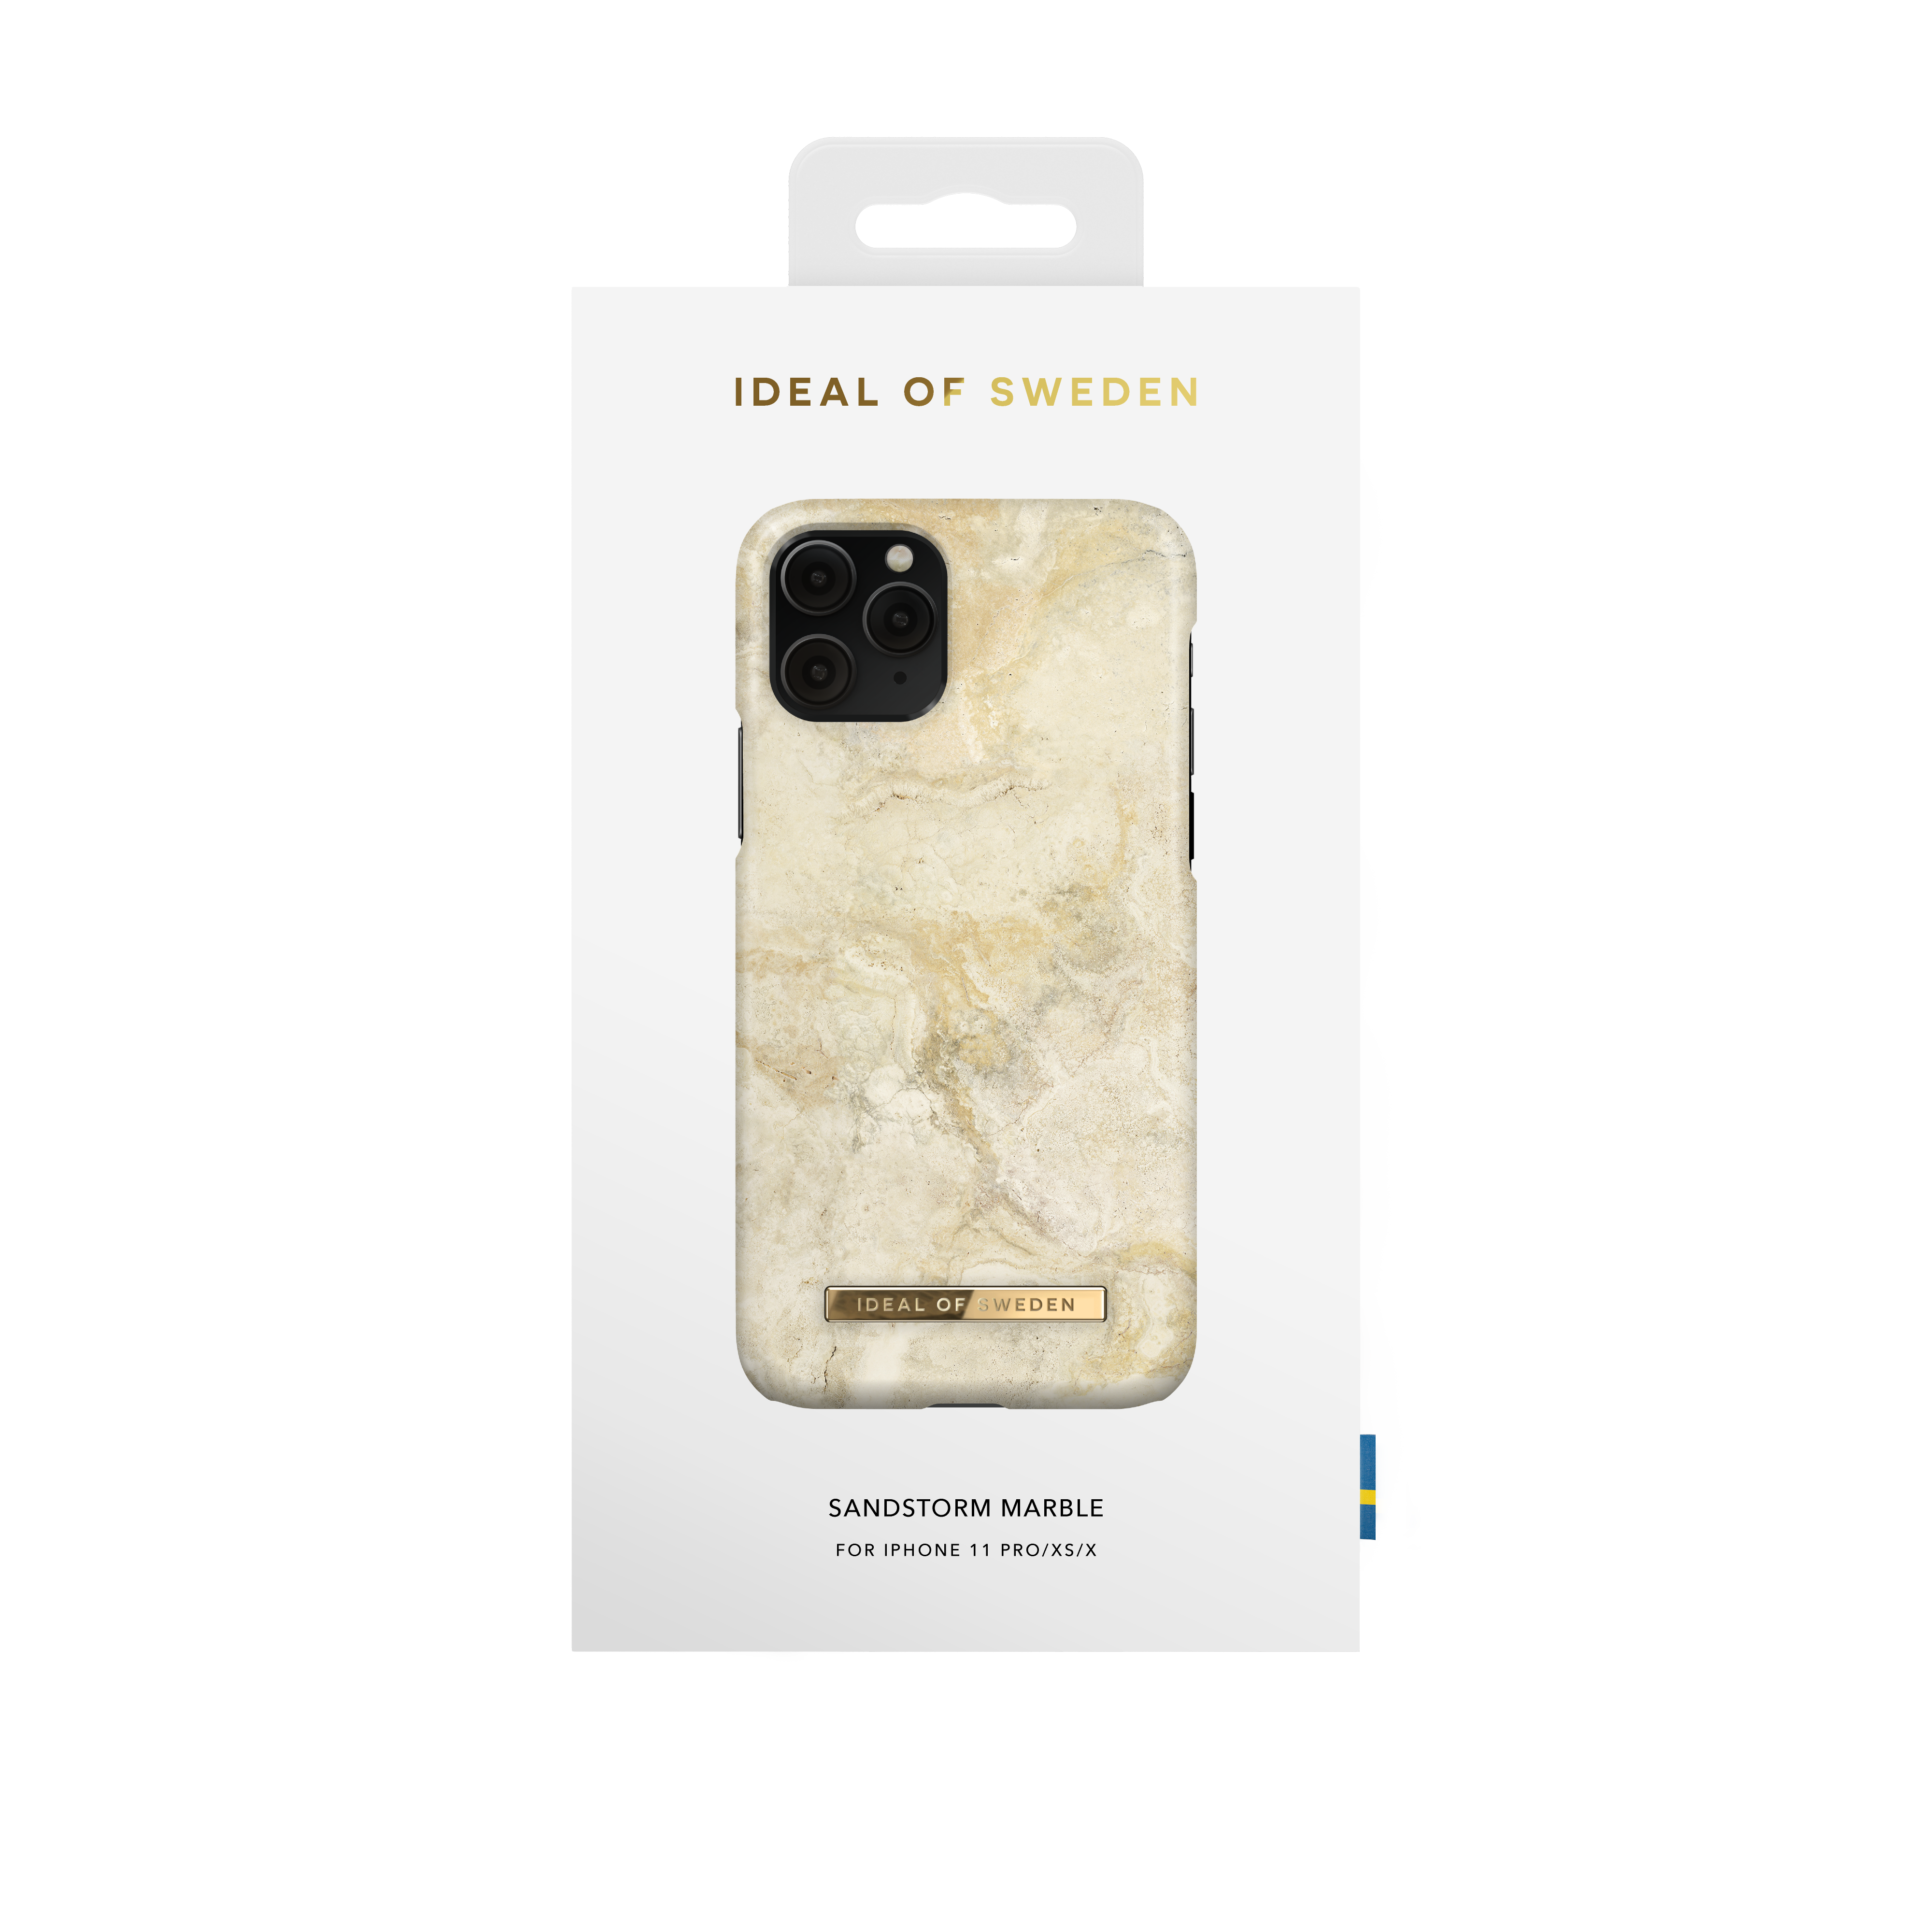 Pro, OF Apple, X, XS, SWEDEN Sandstorm iPhone IDFCSS20-I1958-195, 11 IDEAL iPhone Marble iPhone Backcover,